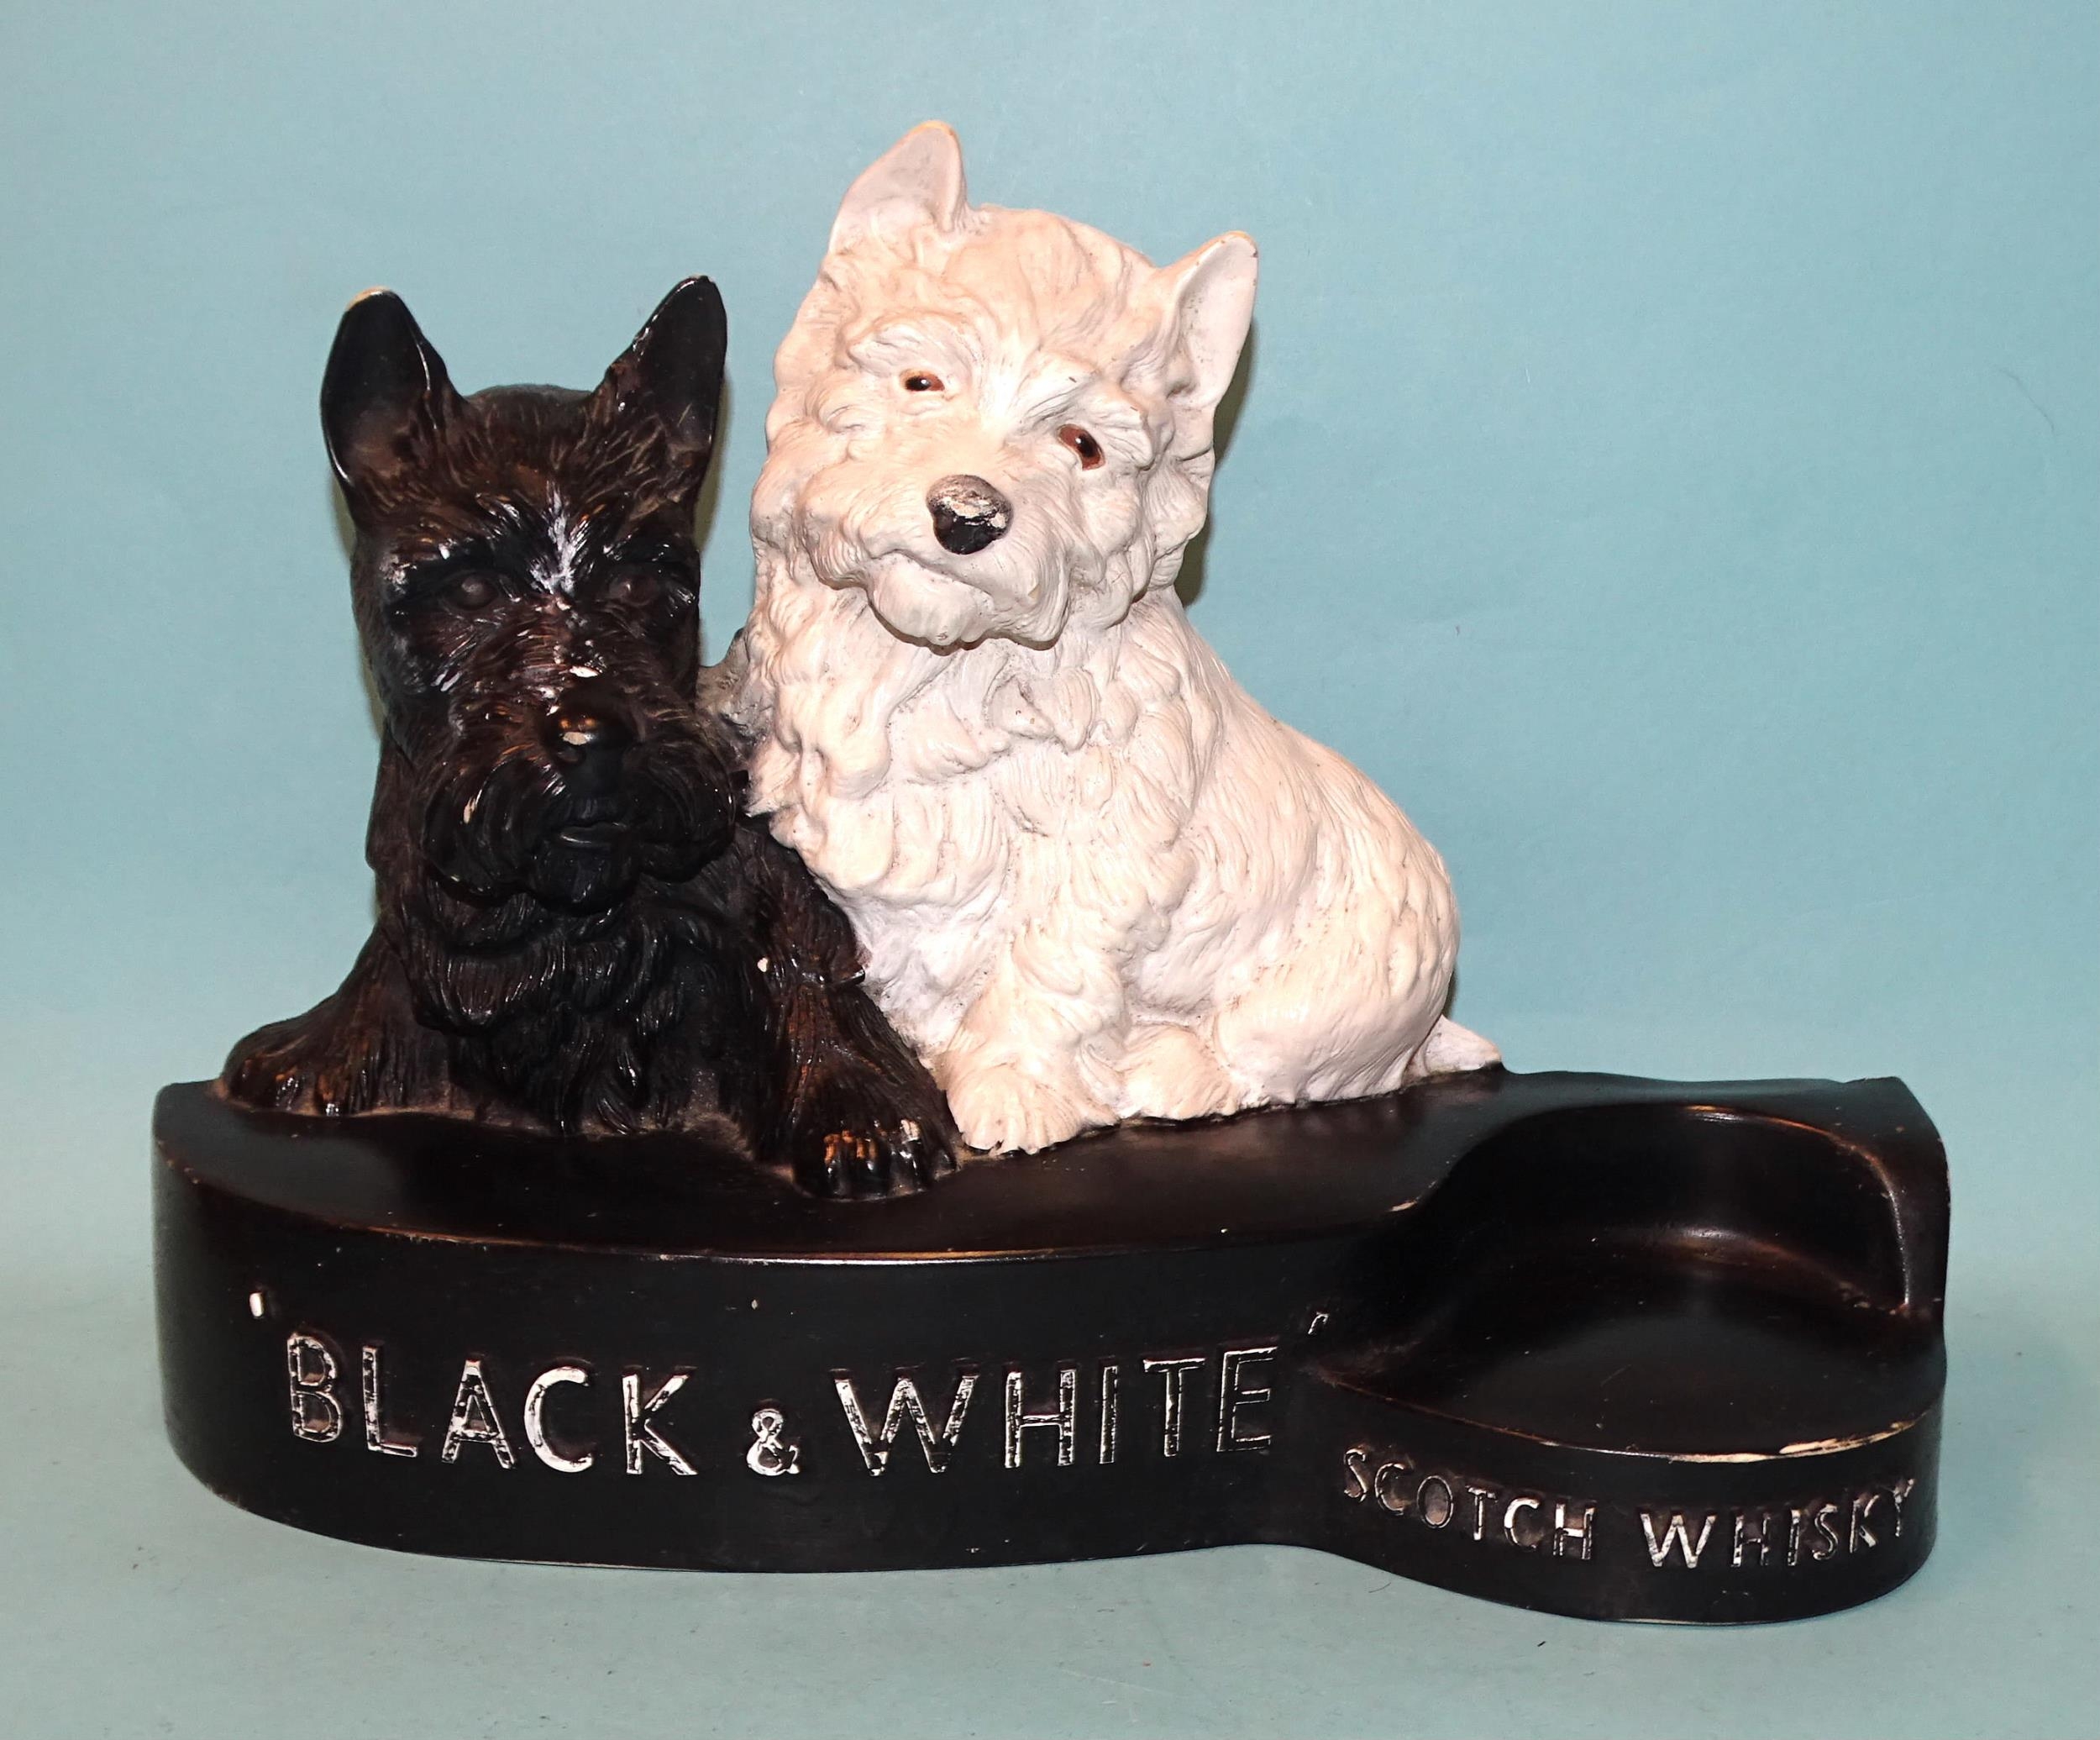 A painted plastic "Black & White Scotch Whisky" advertising stand featuring a black Scottish Terrier